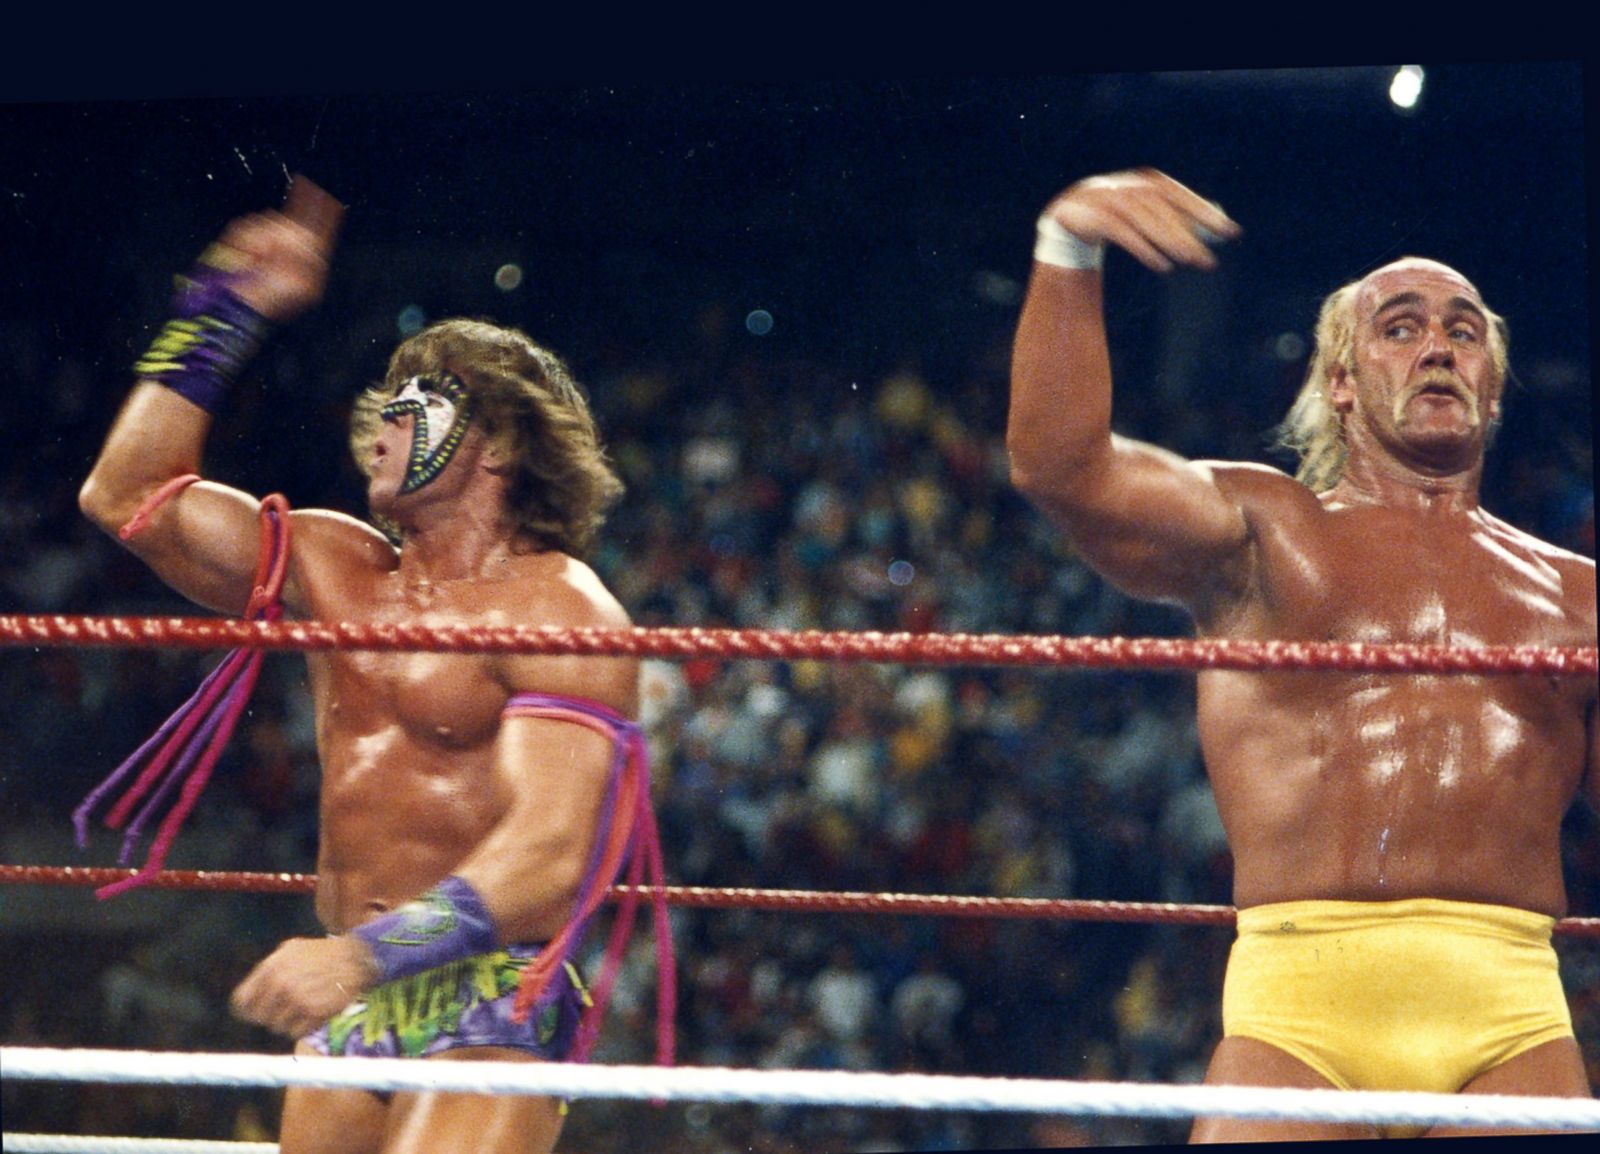 Wwe Legend Ultimate Warrior Dead At 54 Photos Abc News